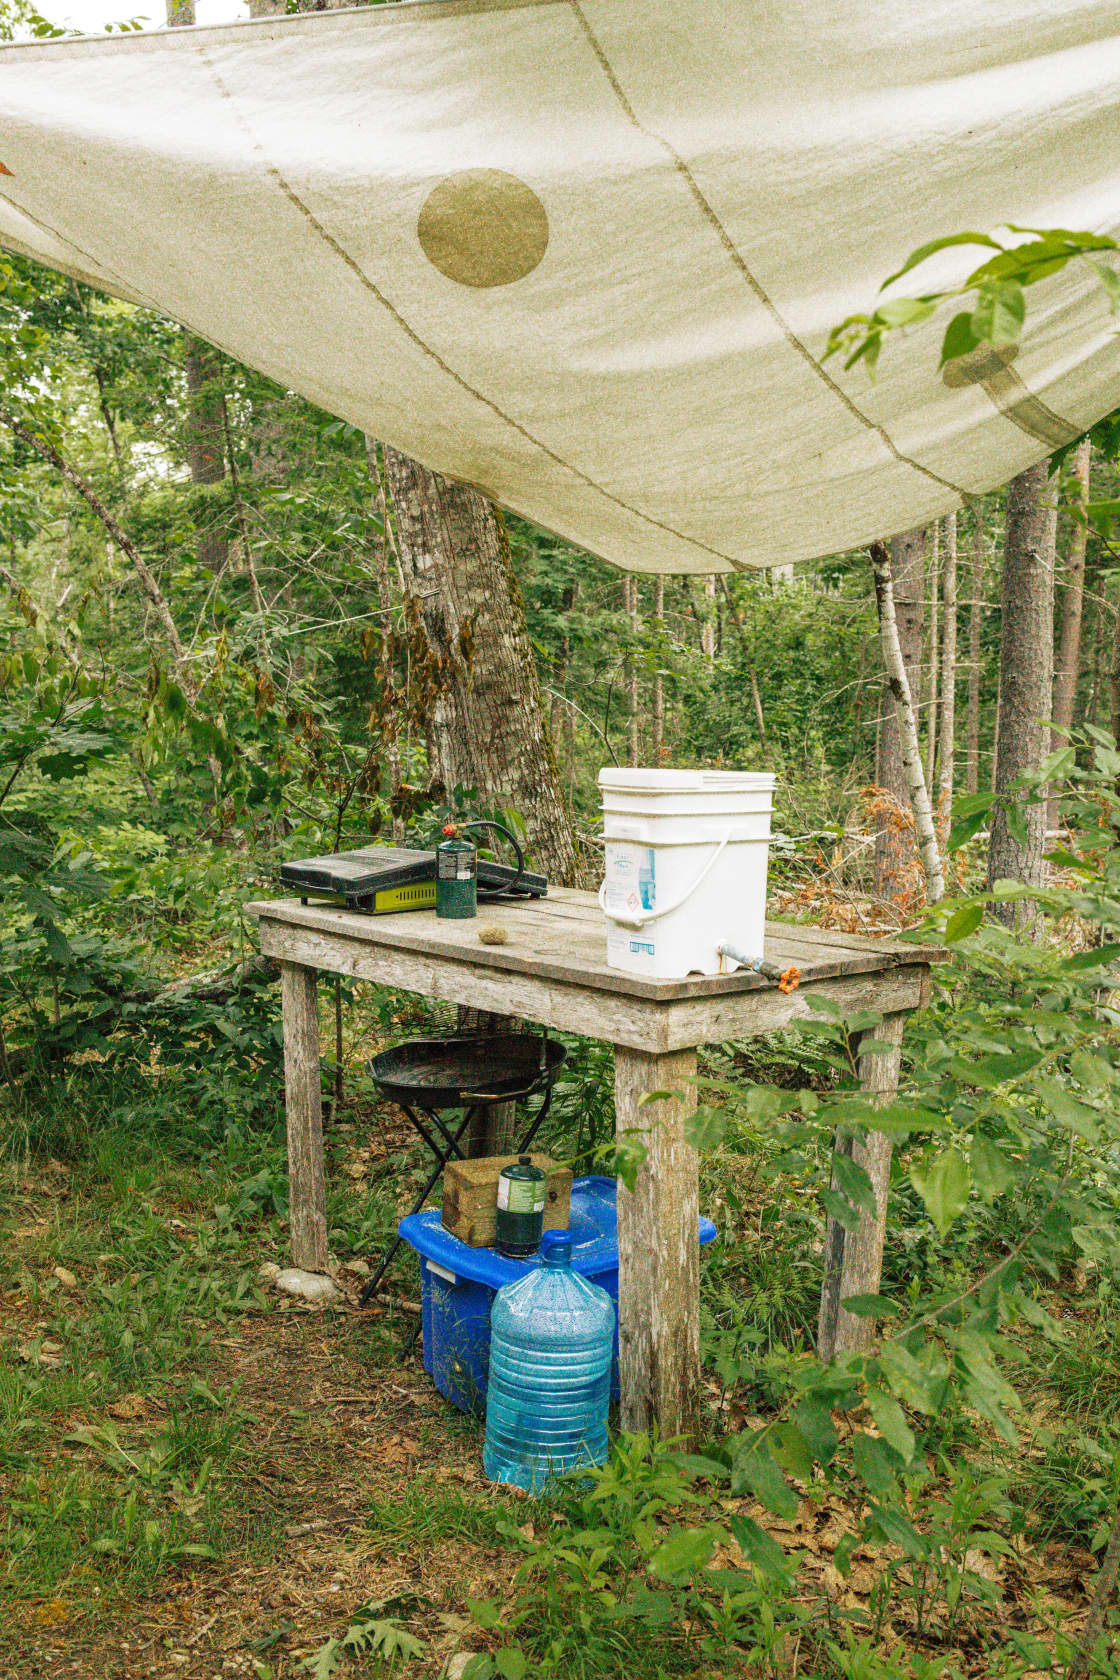 There is a covered cooking area with a charcoal grill and camping stove. 